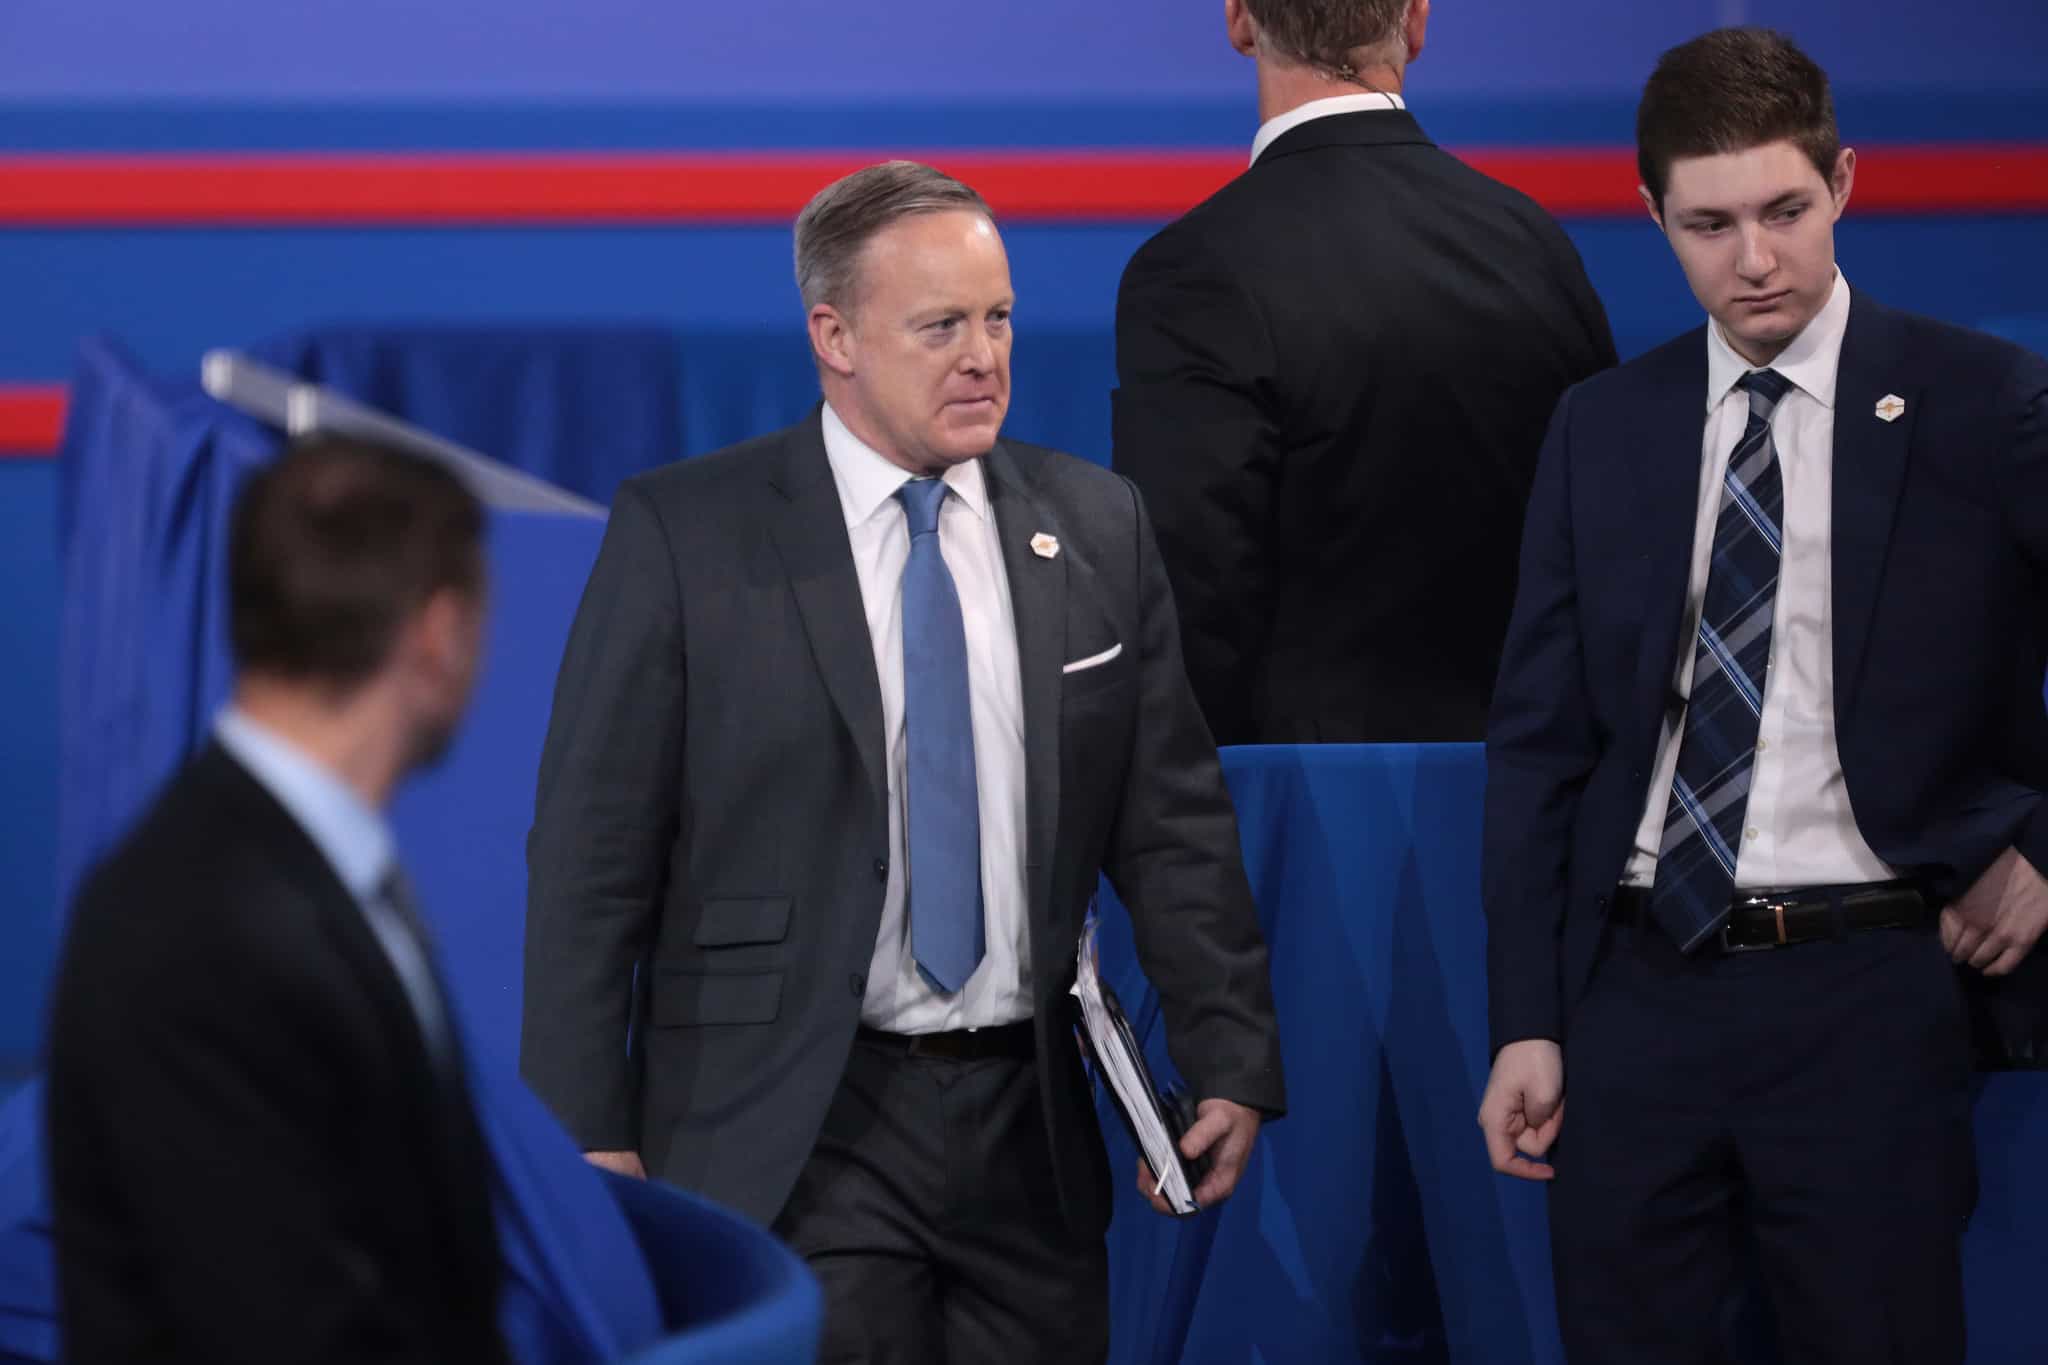 Sean Spicer at the 2017 Conservative Political Action Conference (CPAC) in National Harbor, Maryland.